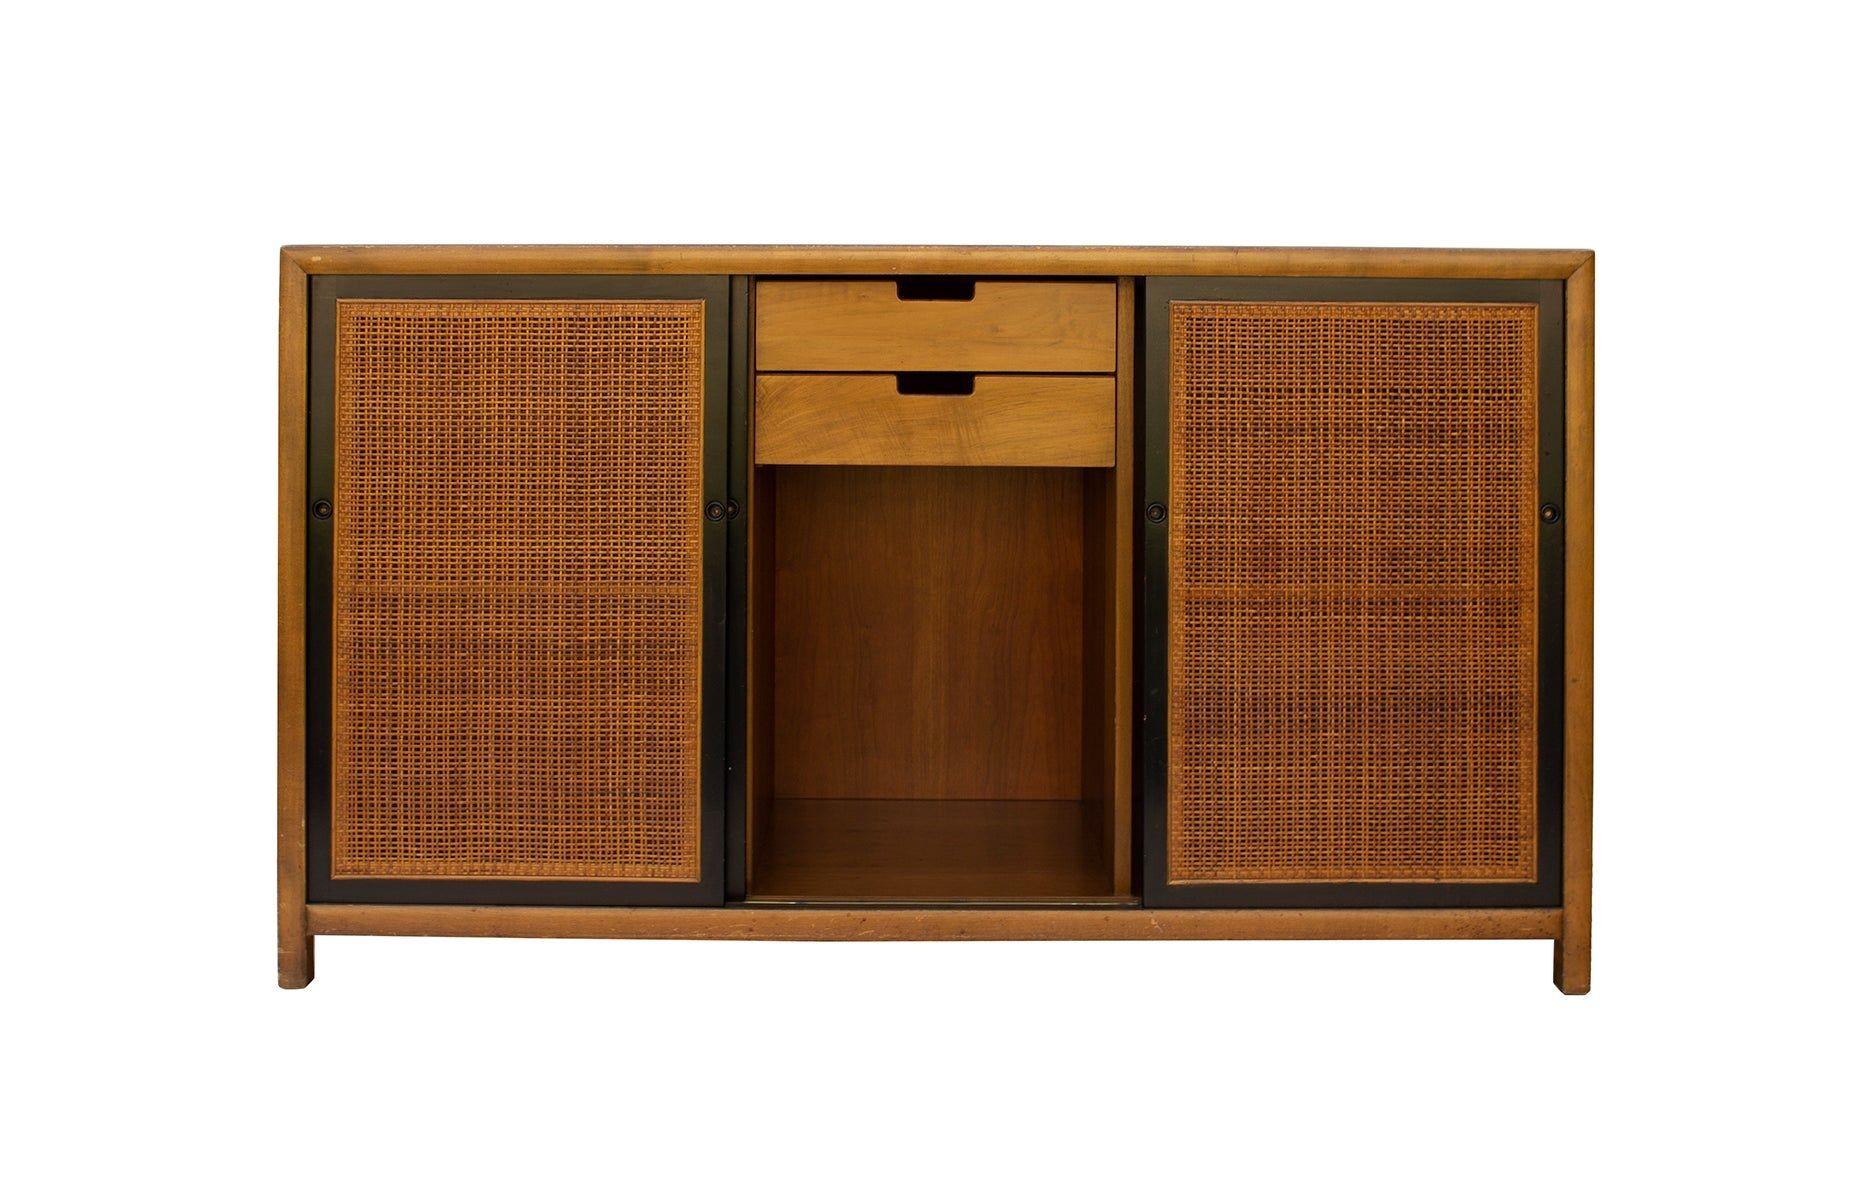 USA, 1960s
Cherry buffet wth ebonized detailing and caned doors designed by Michael Taylor for Baker Furniture. Silver oval tag. A fine amount of storage and texture. Left and right sides of the cabinet each have two fixed position shelves; center